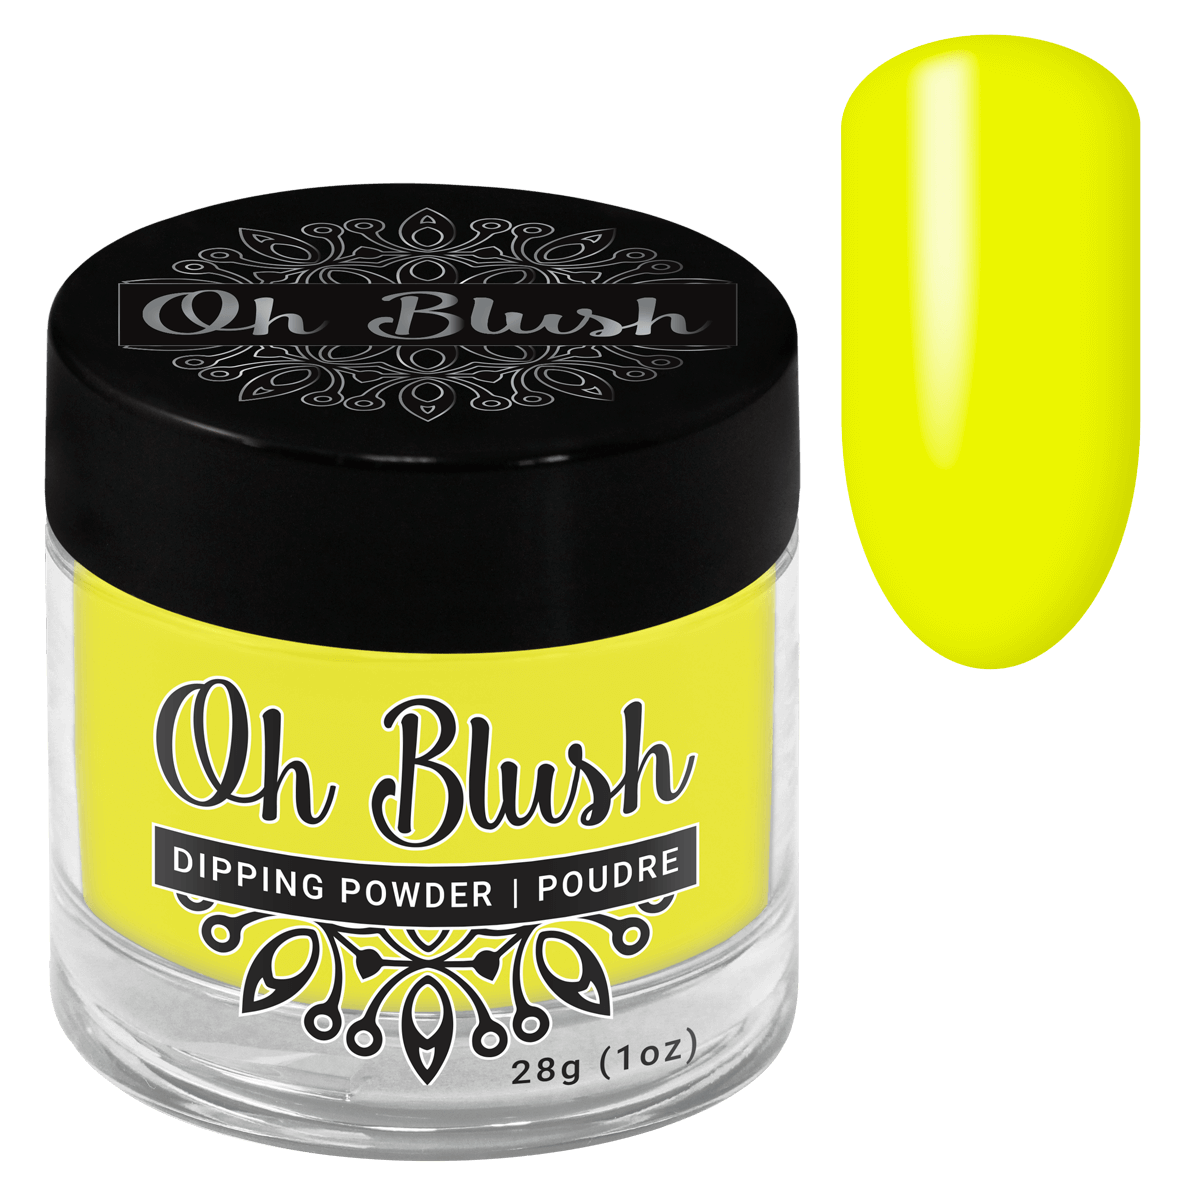 Oh Blush Poudre 248 Canary Islands (1oz)